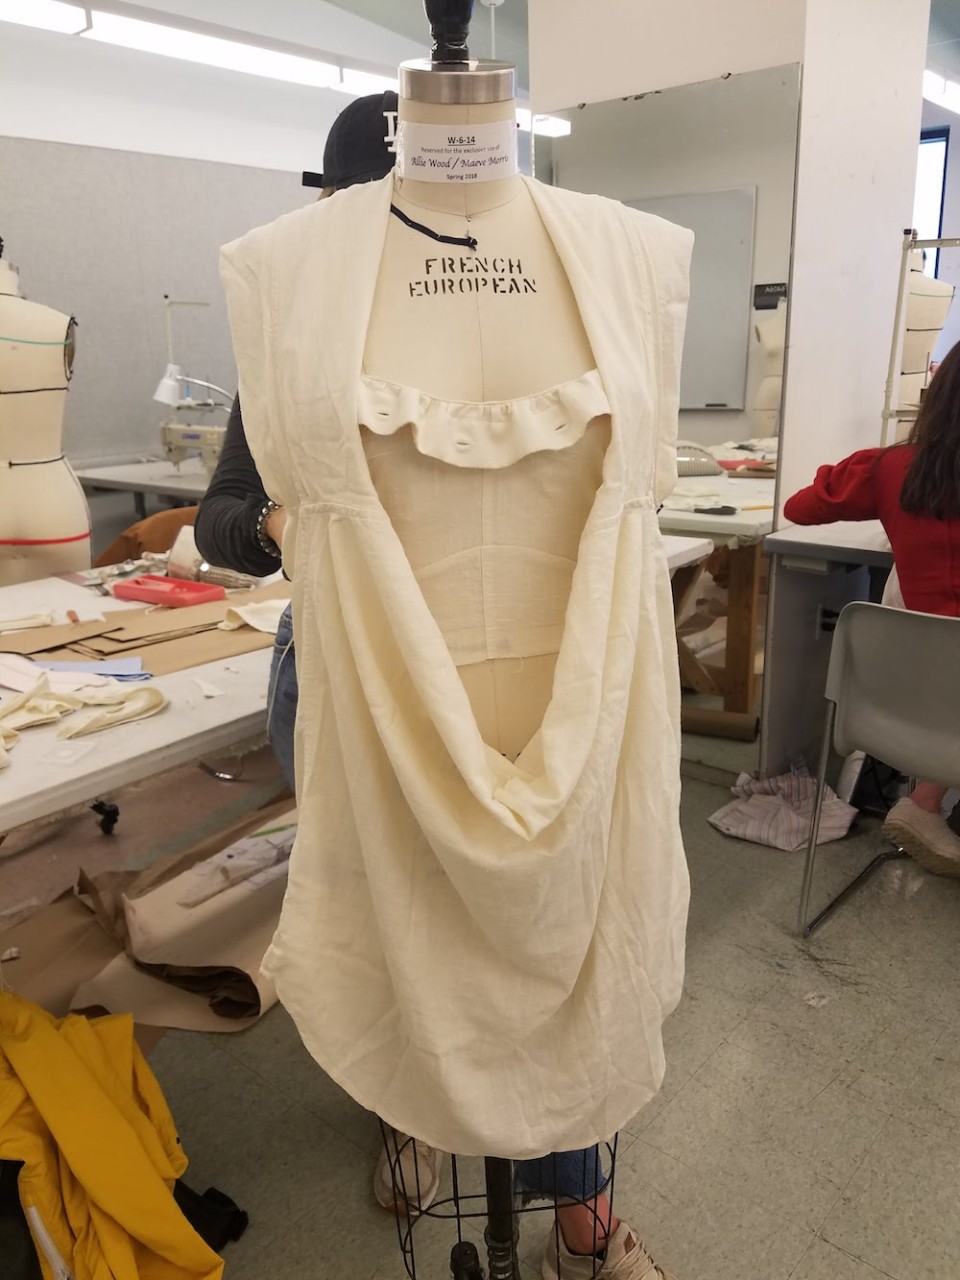 A student fits a garment made from two white button-up shirts on a dress form.